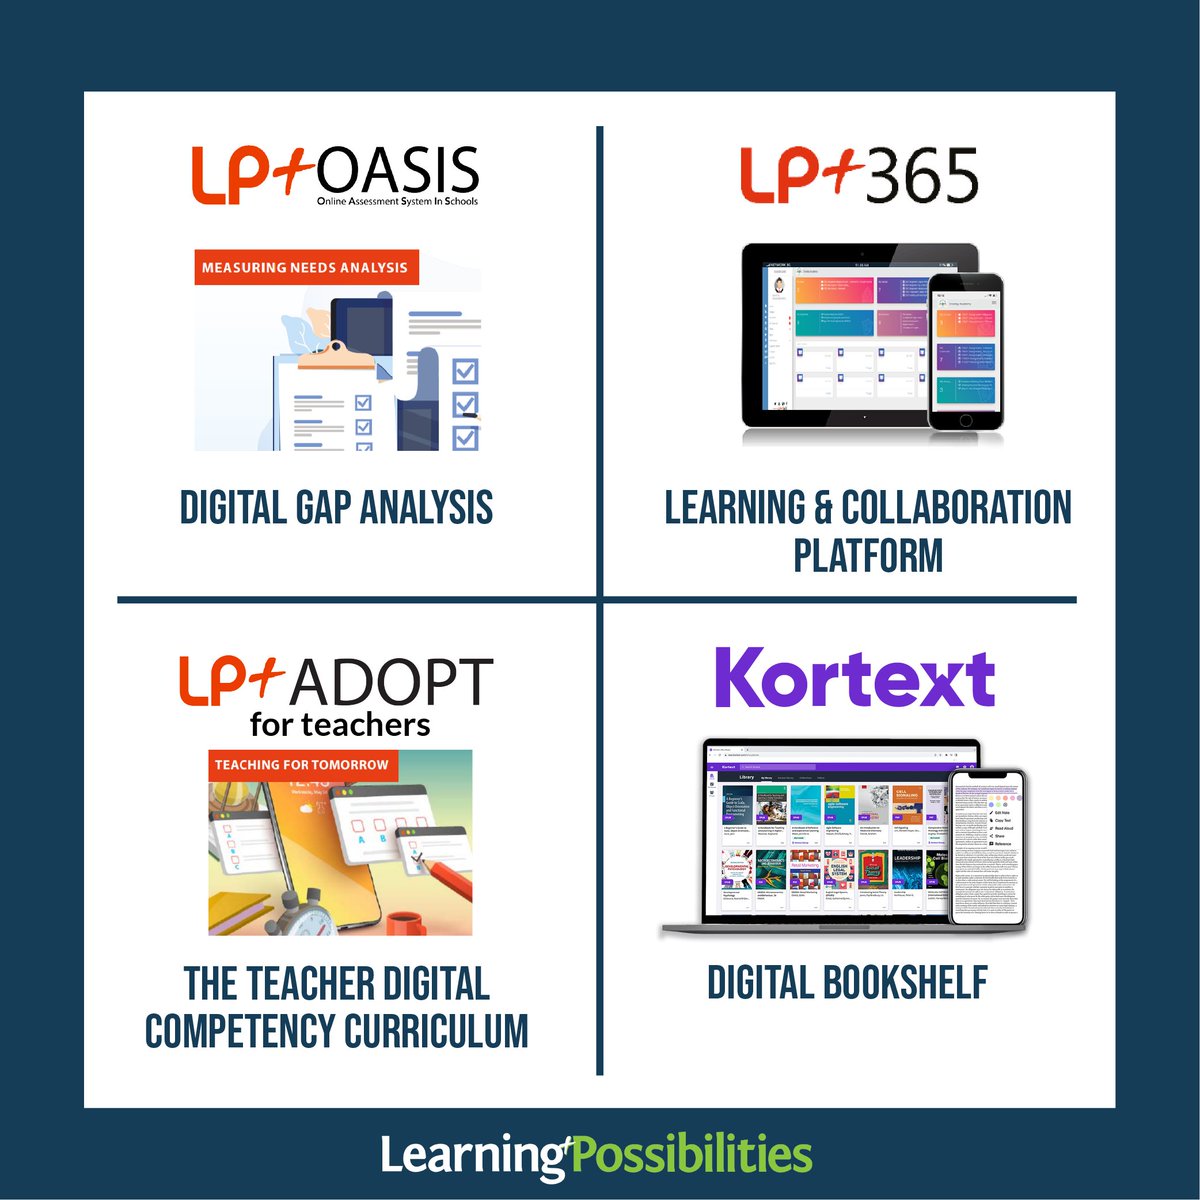 Are you ready to make learning interactive, engaging and collaborative? Discover what our LP+ K12 offer includes by registering for a 30-minute demo call - lnkd.in/eNw5Bf6b

#Kortext #edtech #schools #k12schools #techforschools #schooltechnology #lmssoftware